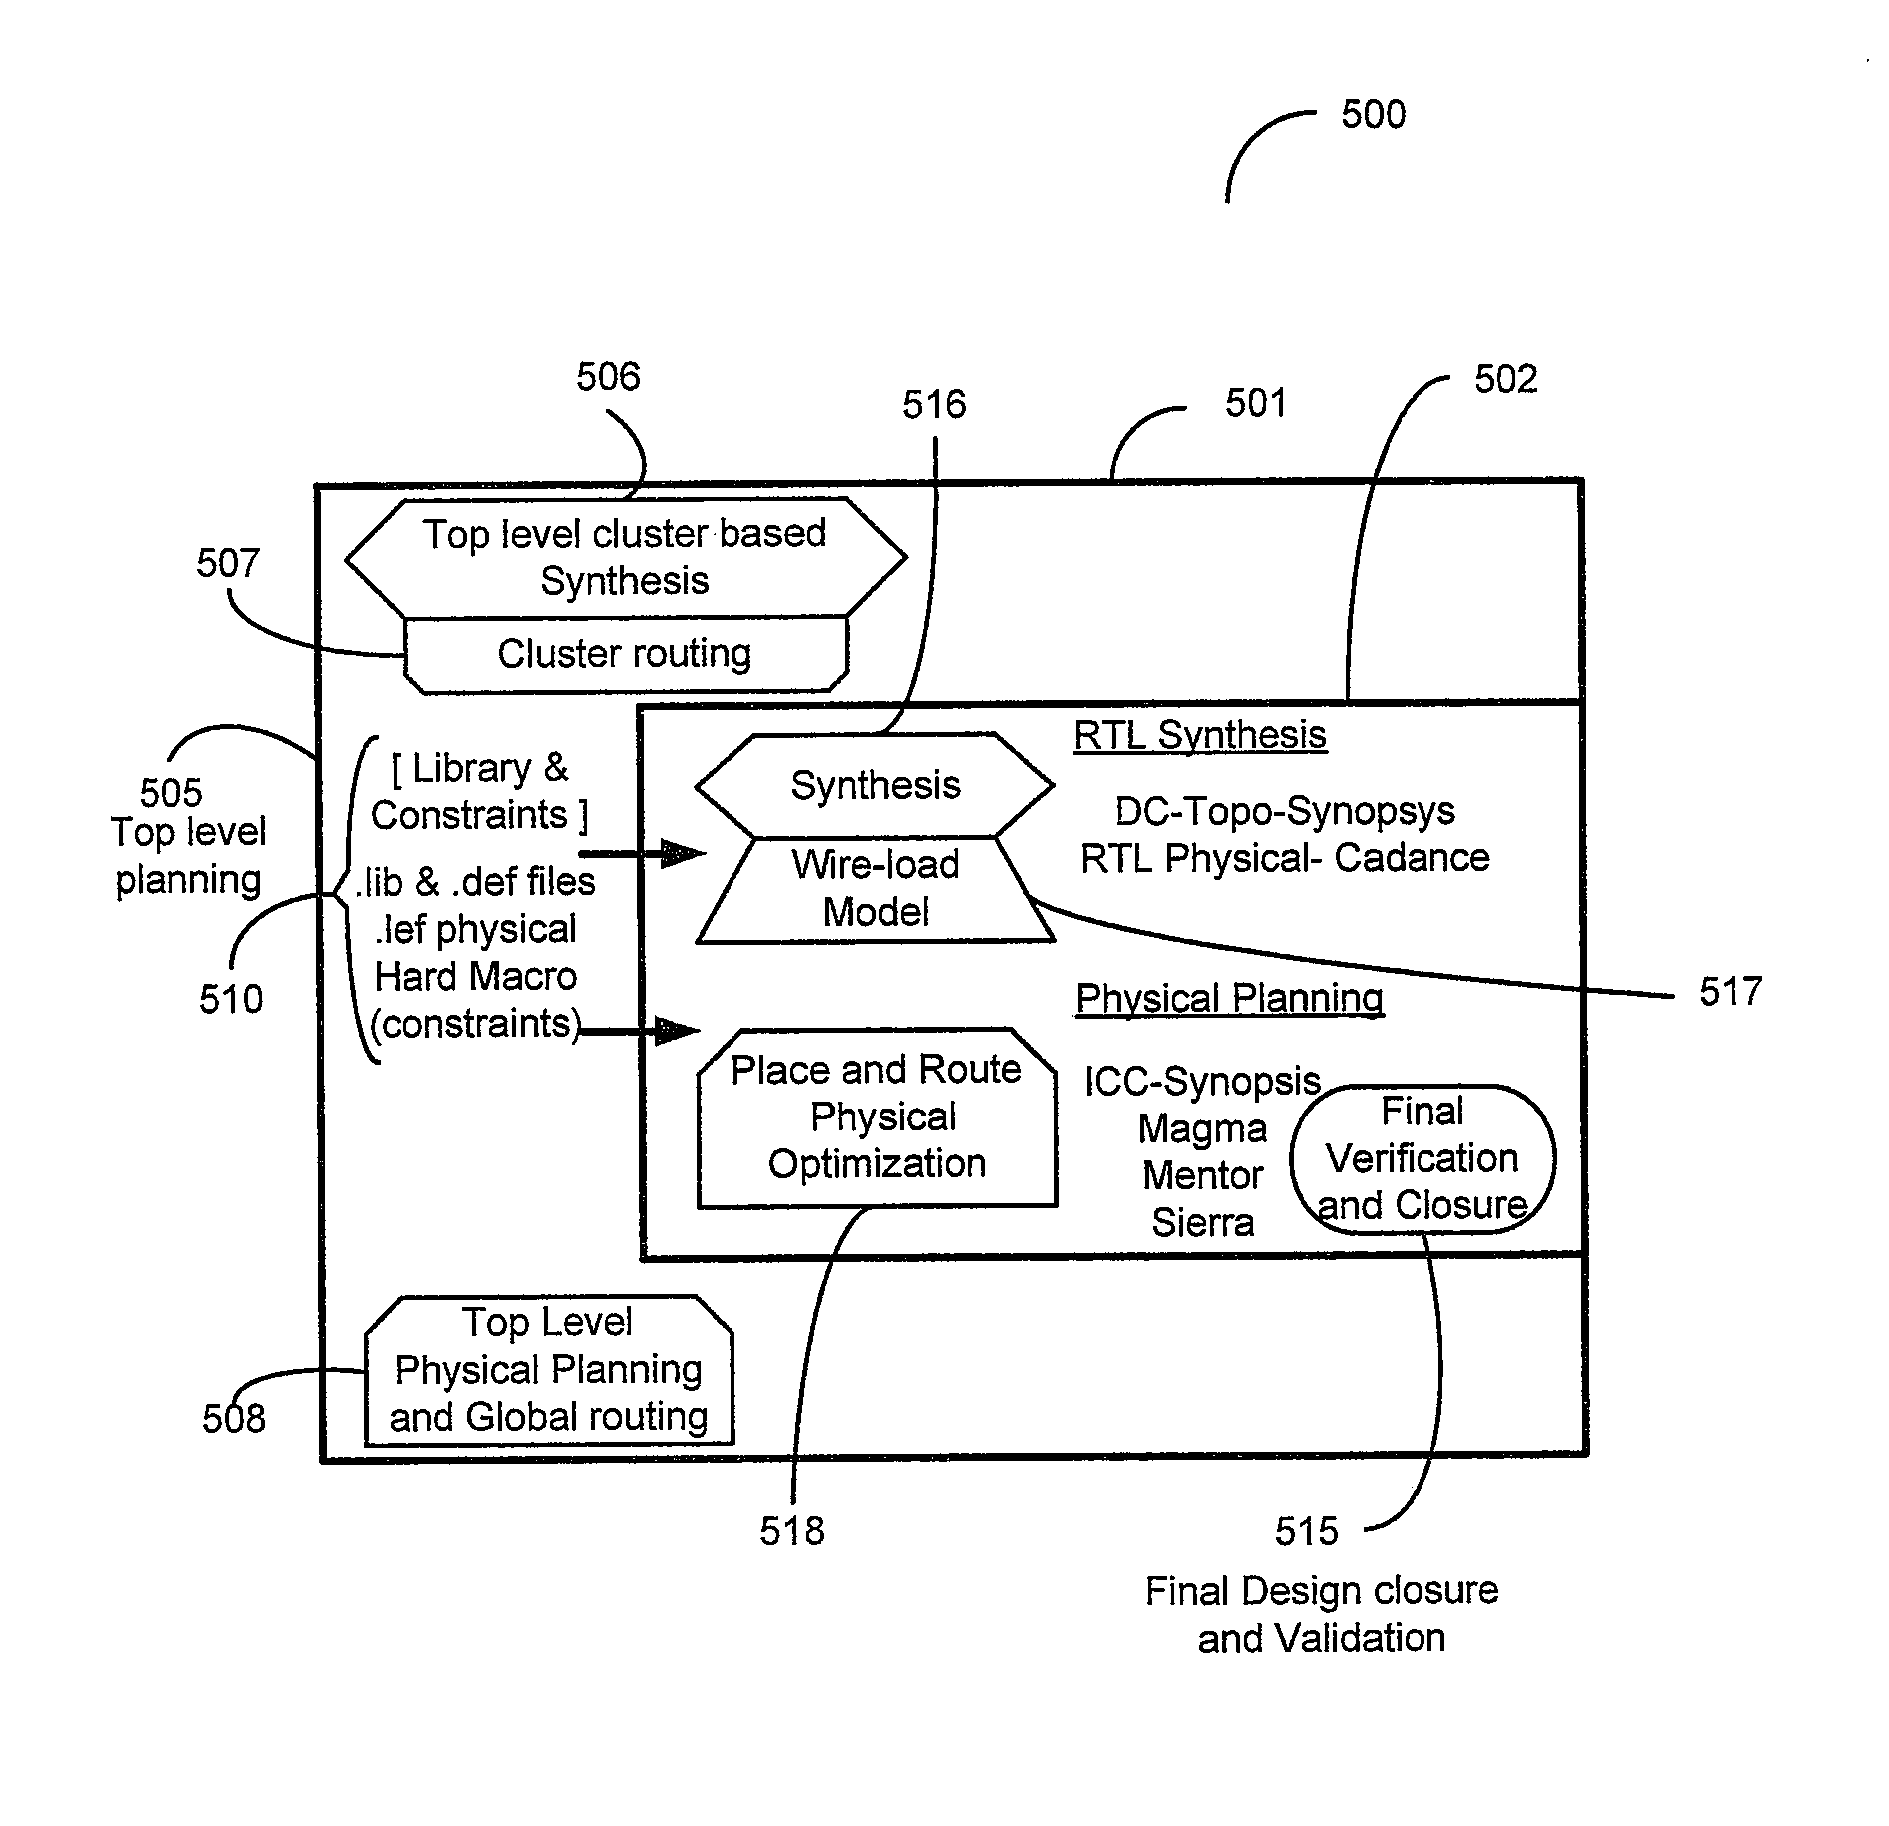 Method of global design closure at top level and driving of downstream implementation flow